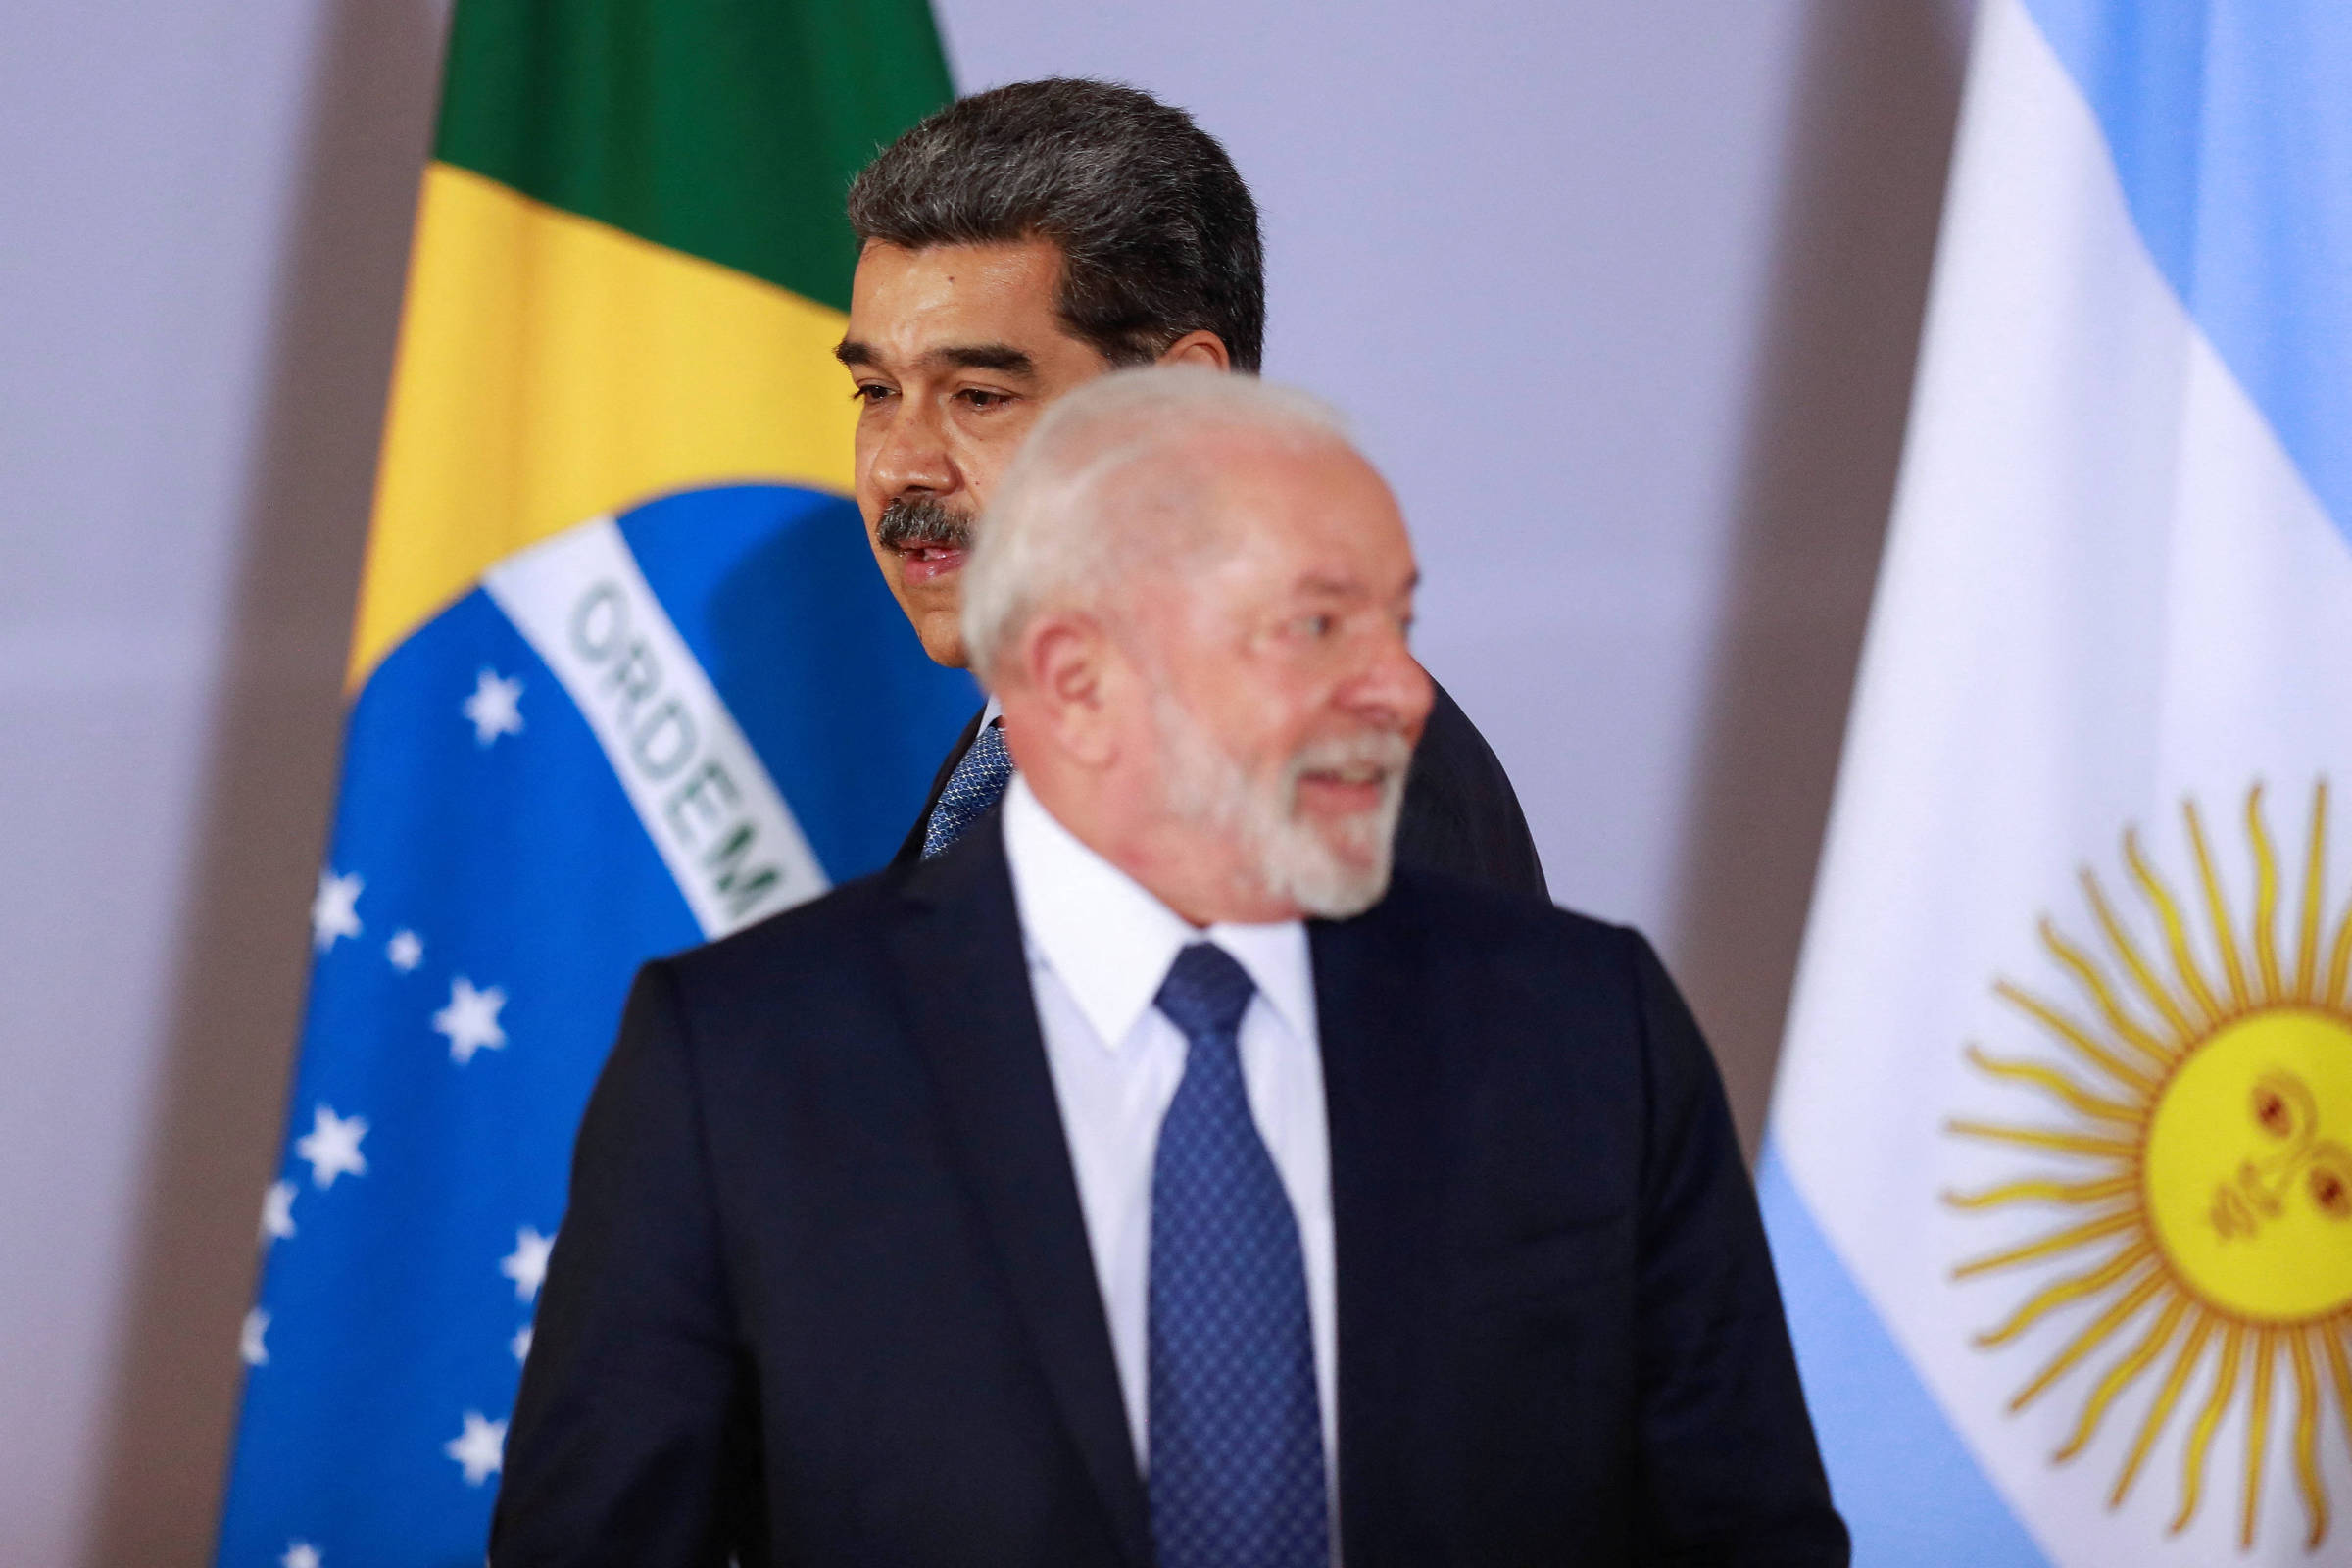 Venezuela is not an obstacle to the integration of South America, says Unasur articulator